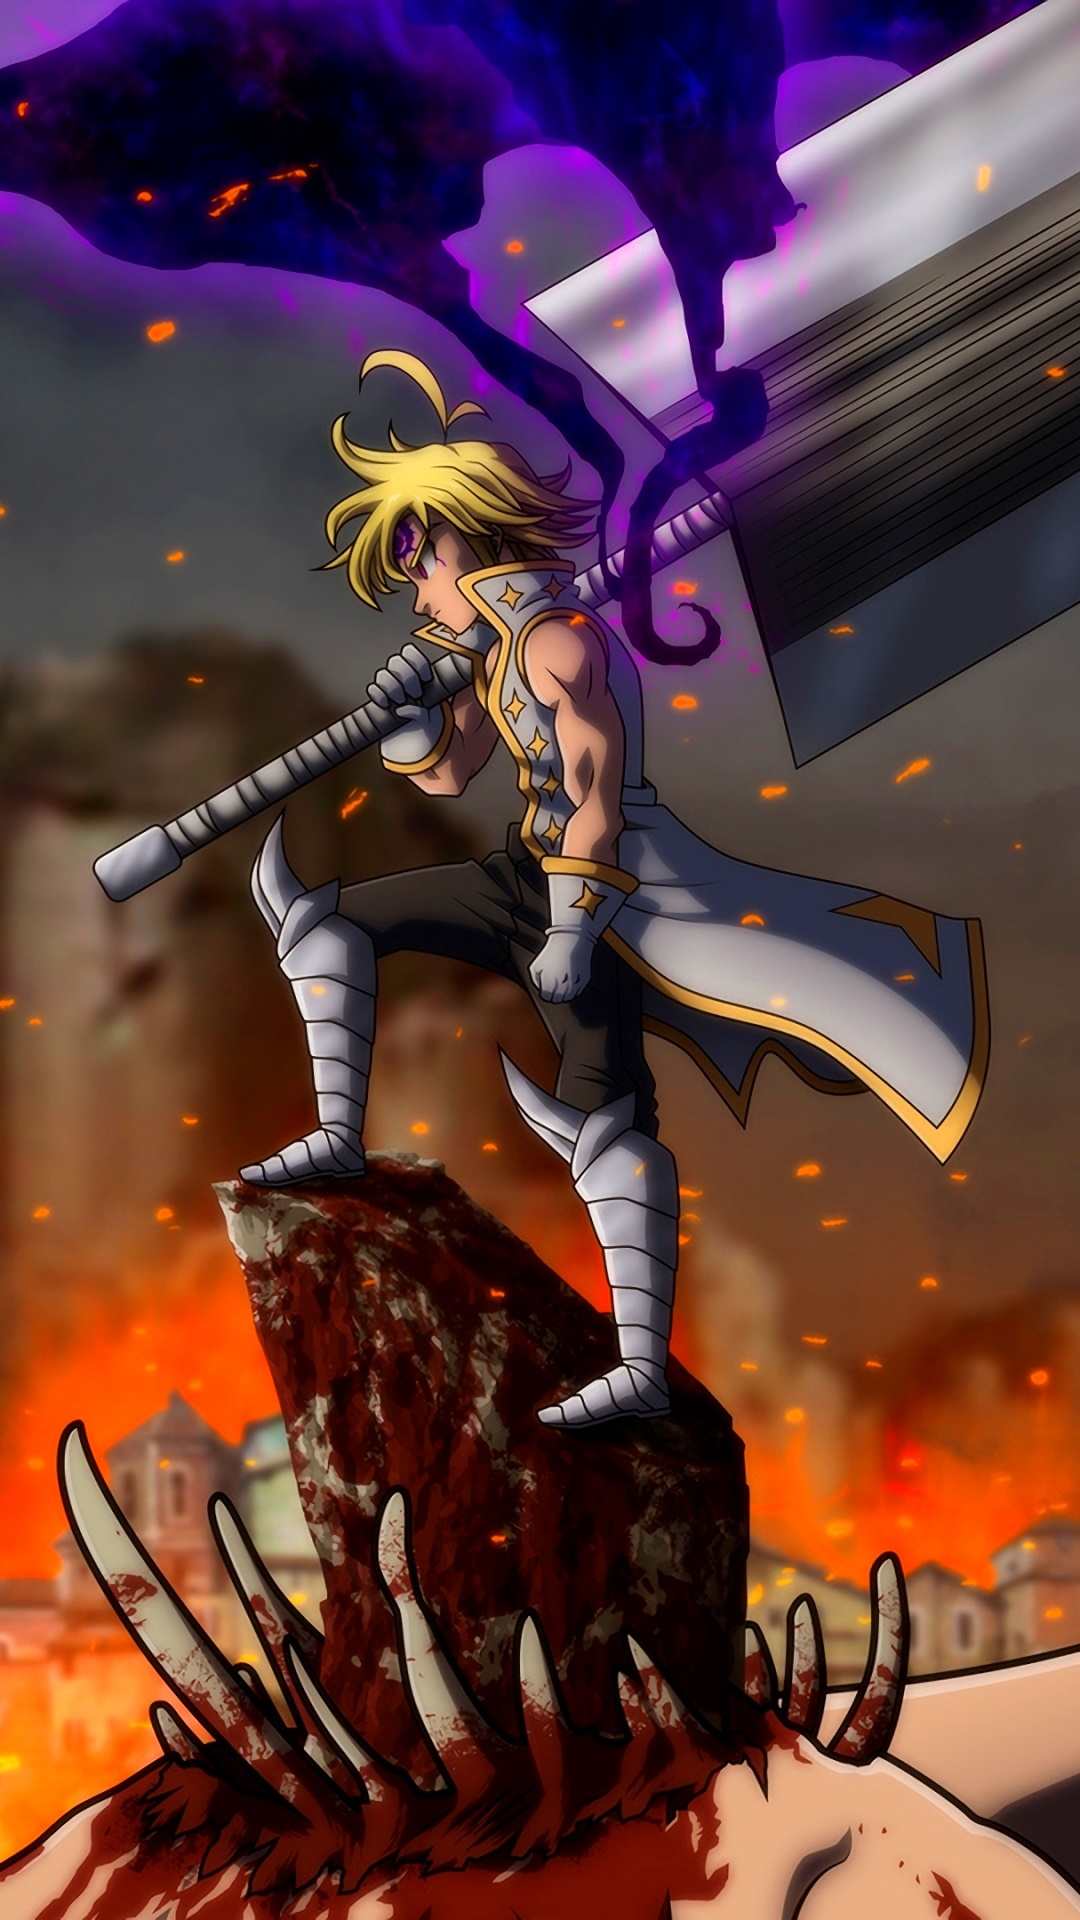 Wallpaper id anime the seven deadly sins phone wallpaper meliodas the seven deadly sins demon king the seven deadly sins x free download